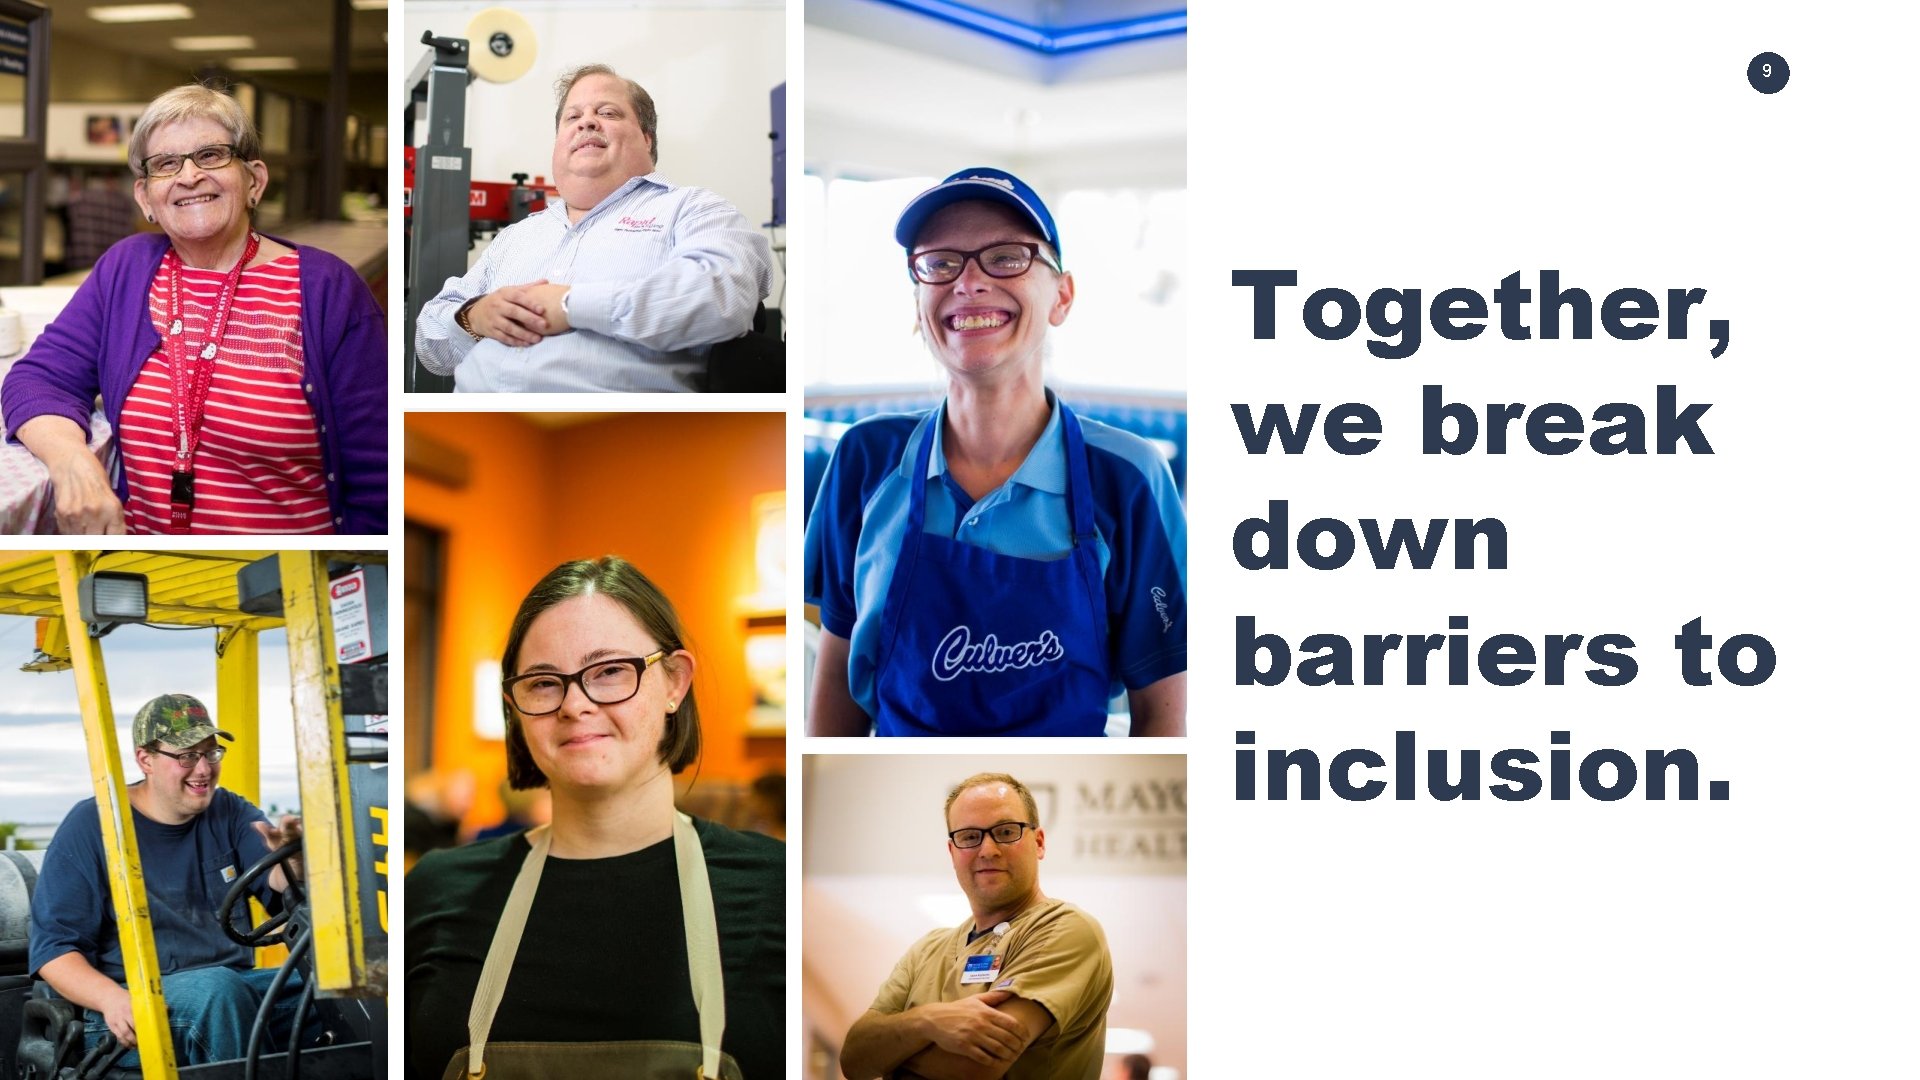 9 Together, we break down barriers to inclusion. 